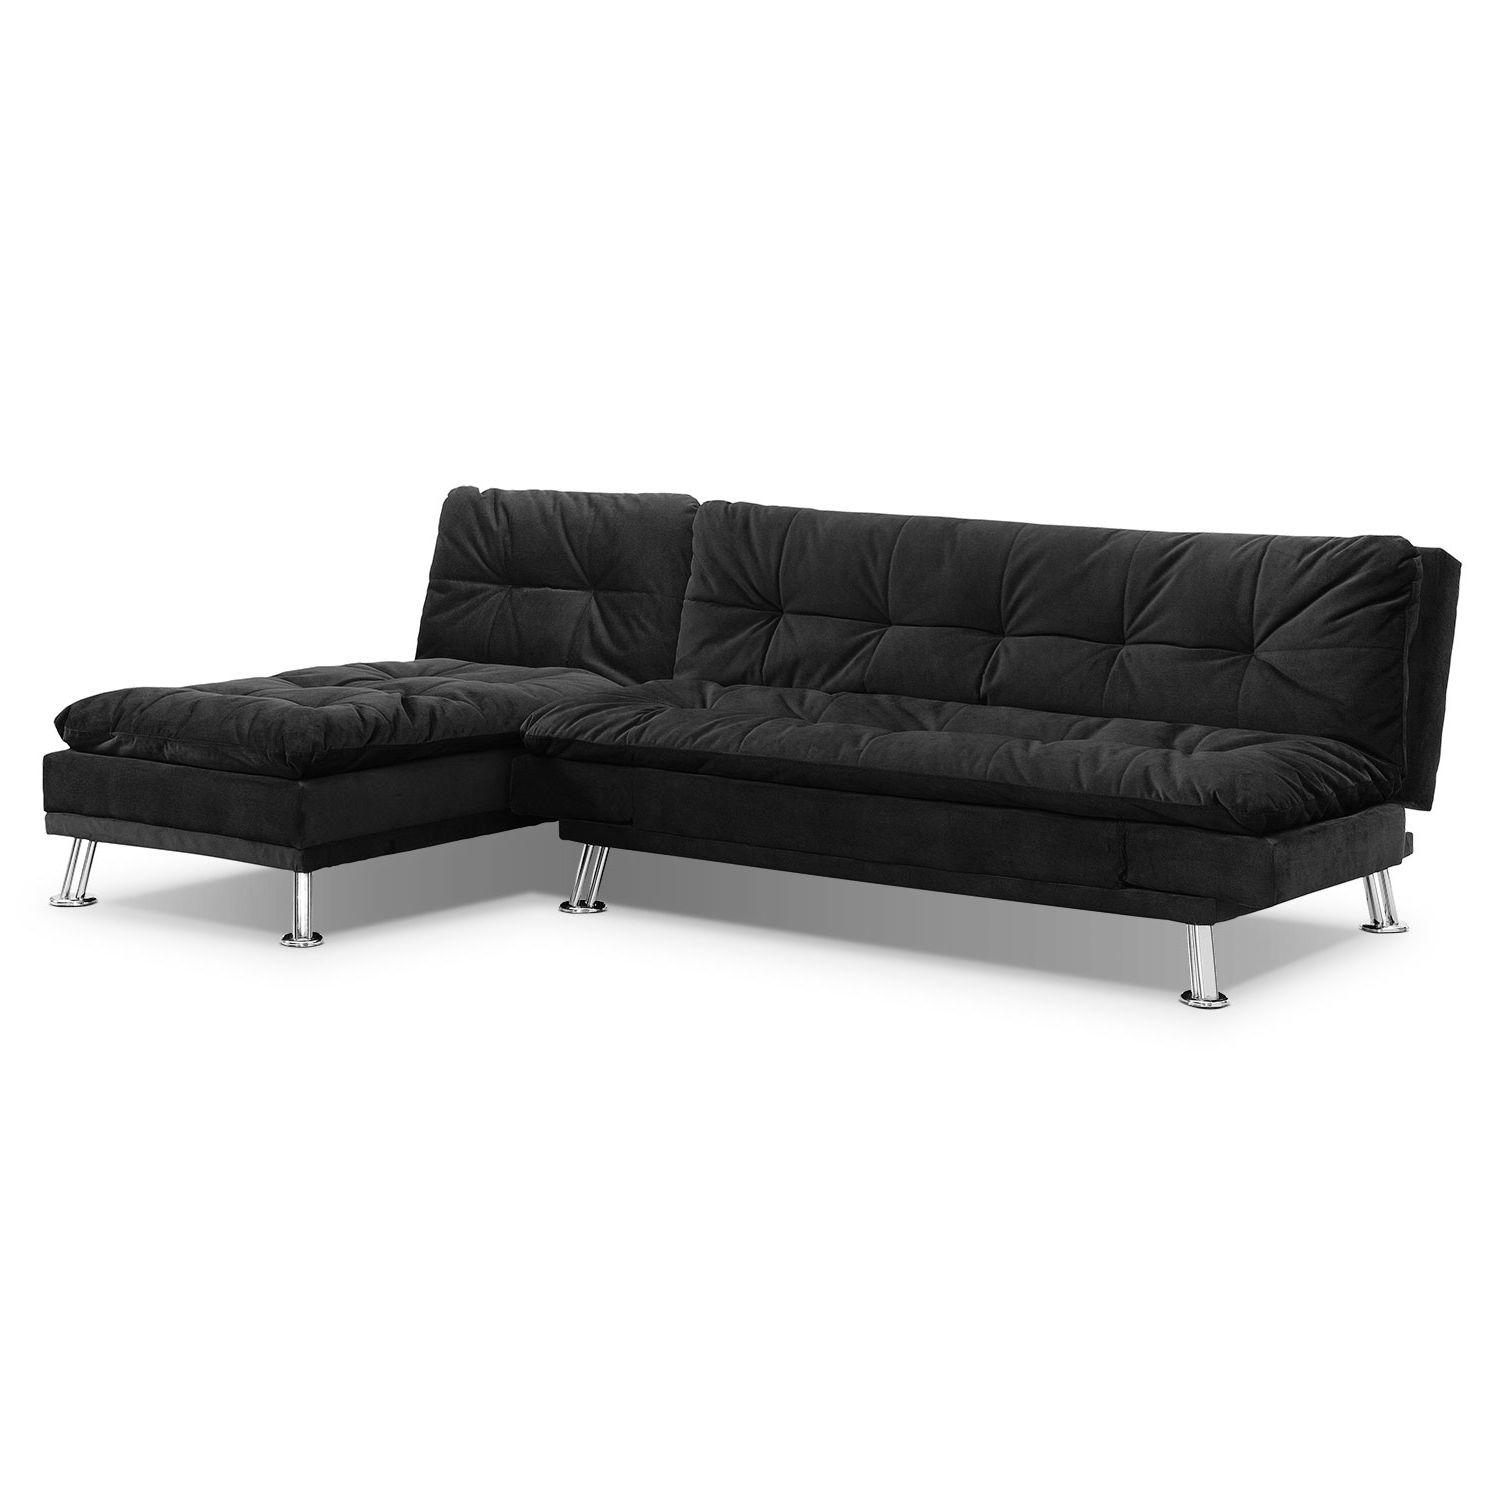 Futon Chaises Pertaining To Most Up To Date Waltz Futon Sofa Bed With Chaise – Black (View 14 of 15)